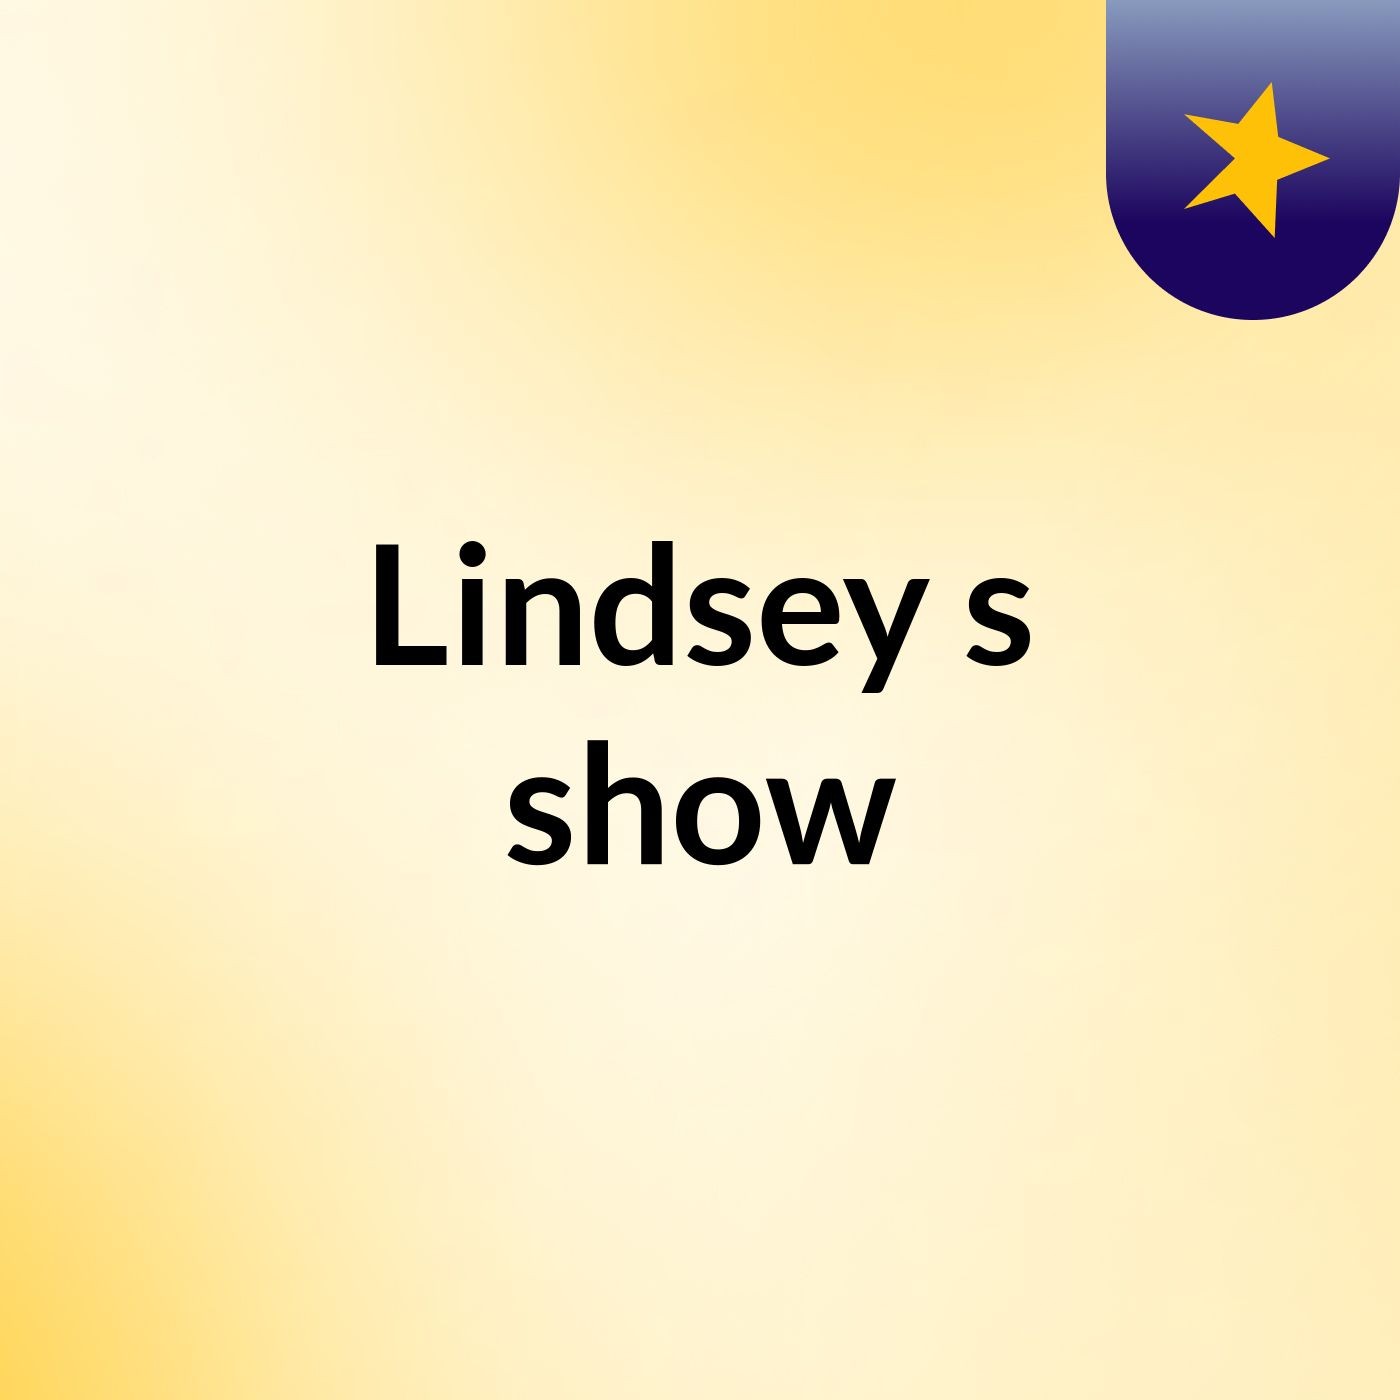 Lindsey's show